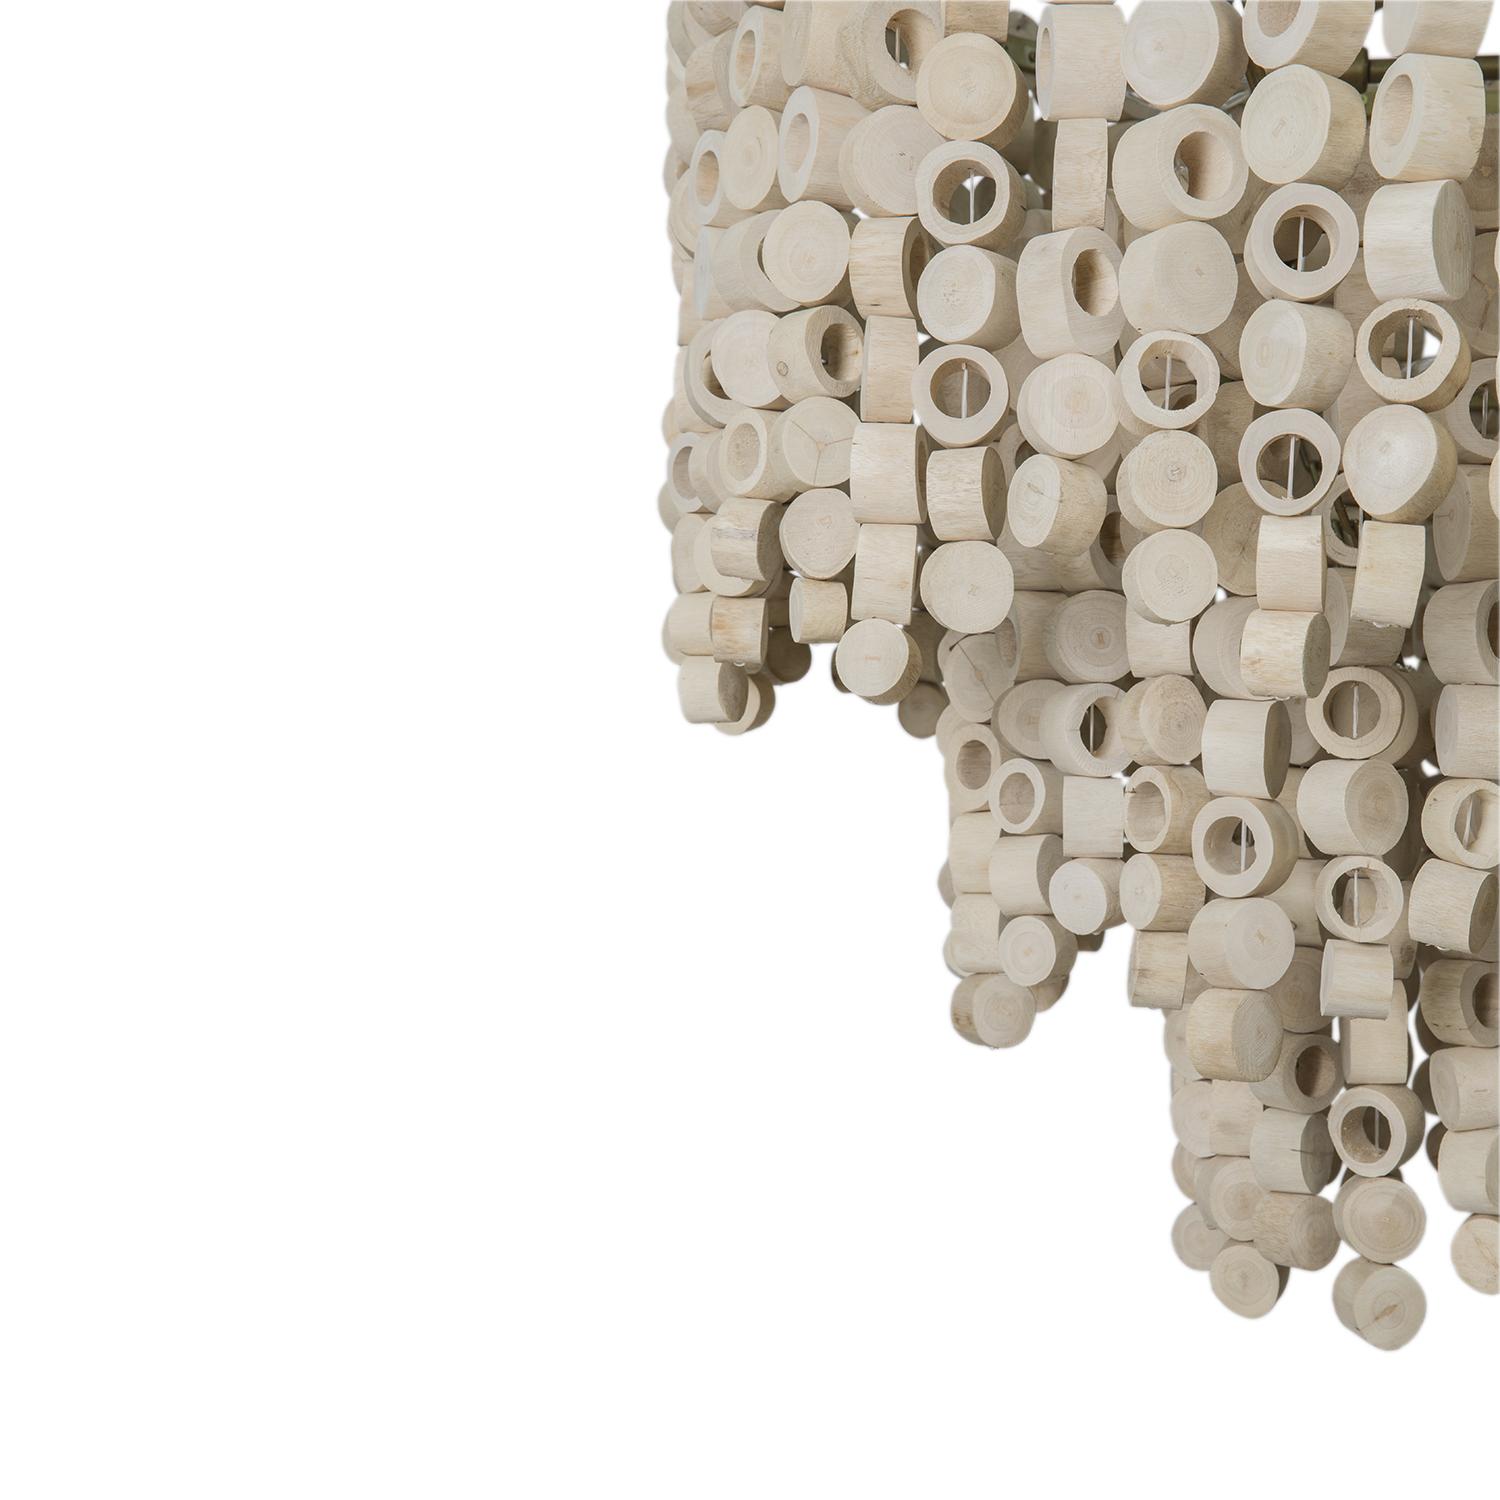 Round Wood Disc Chandelier in Natural Finish